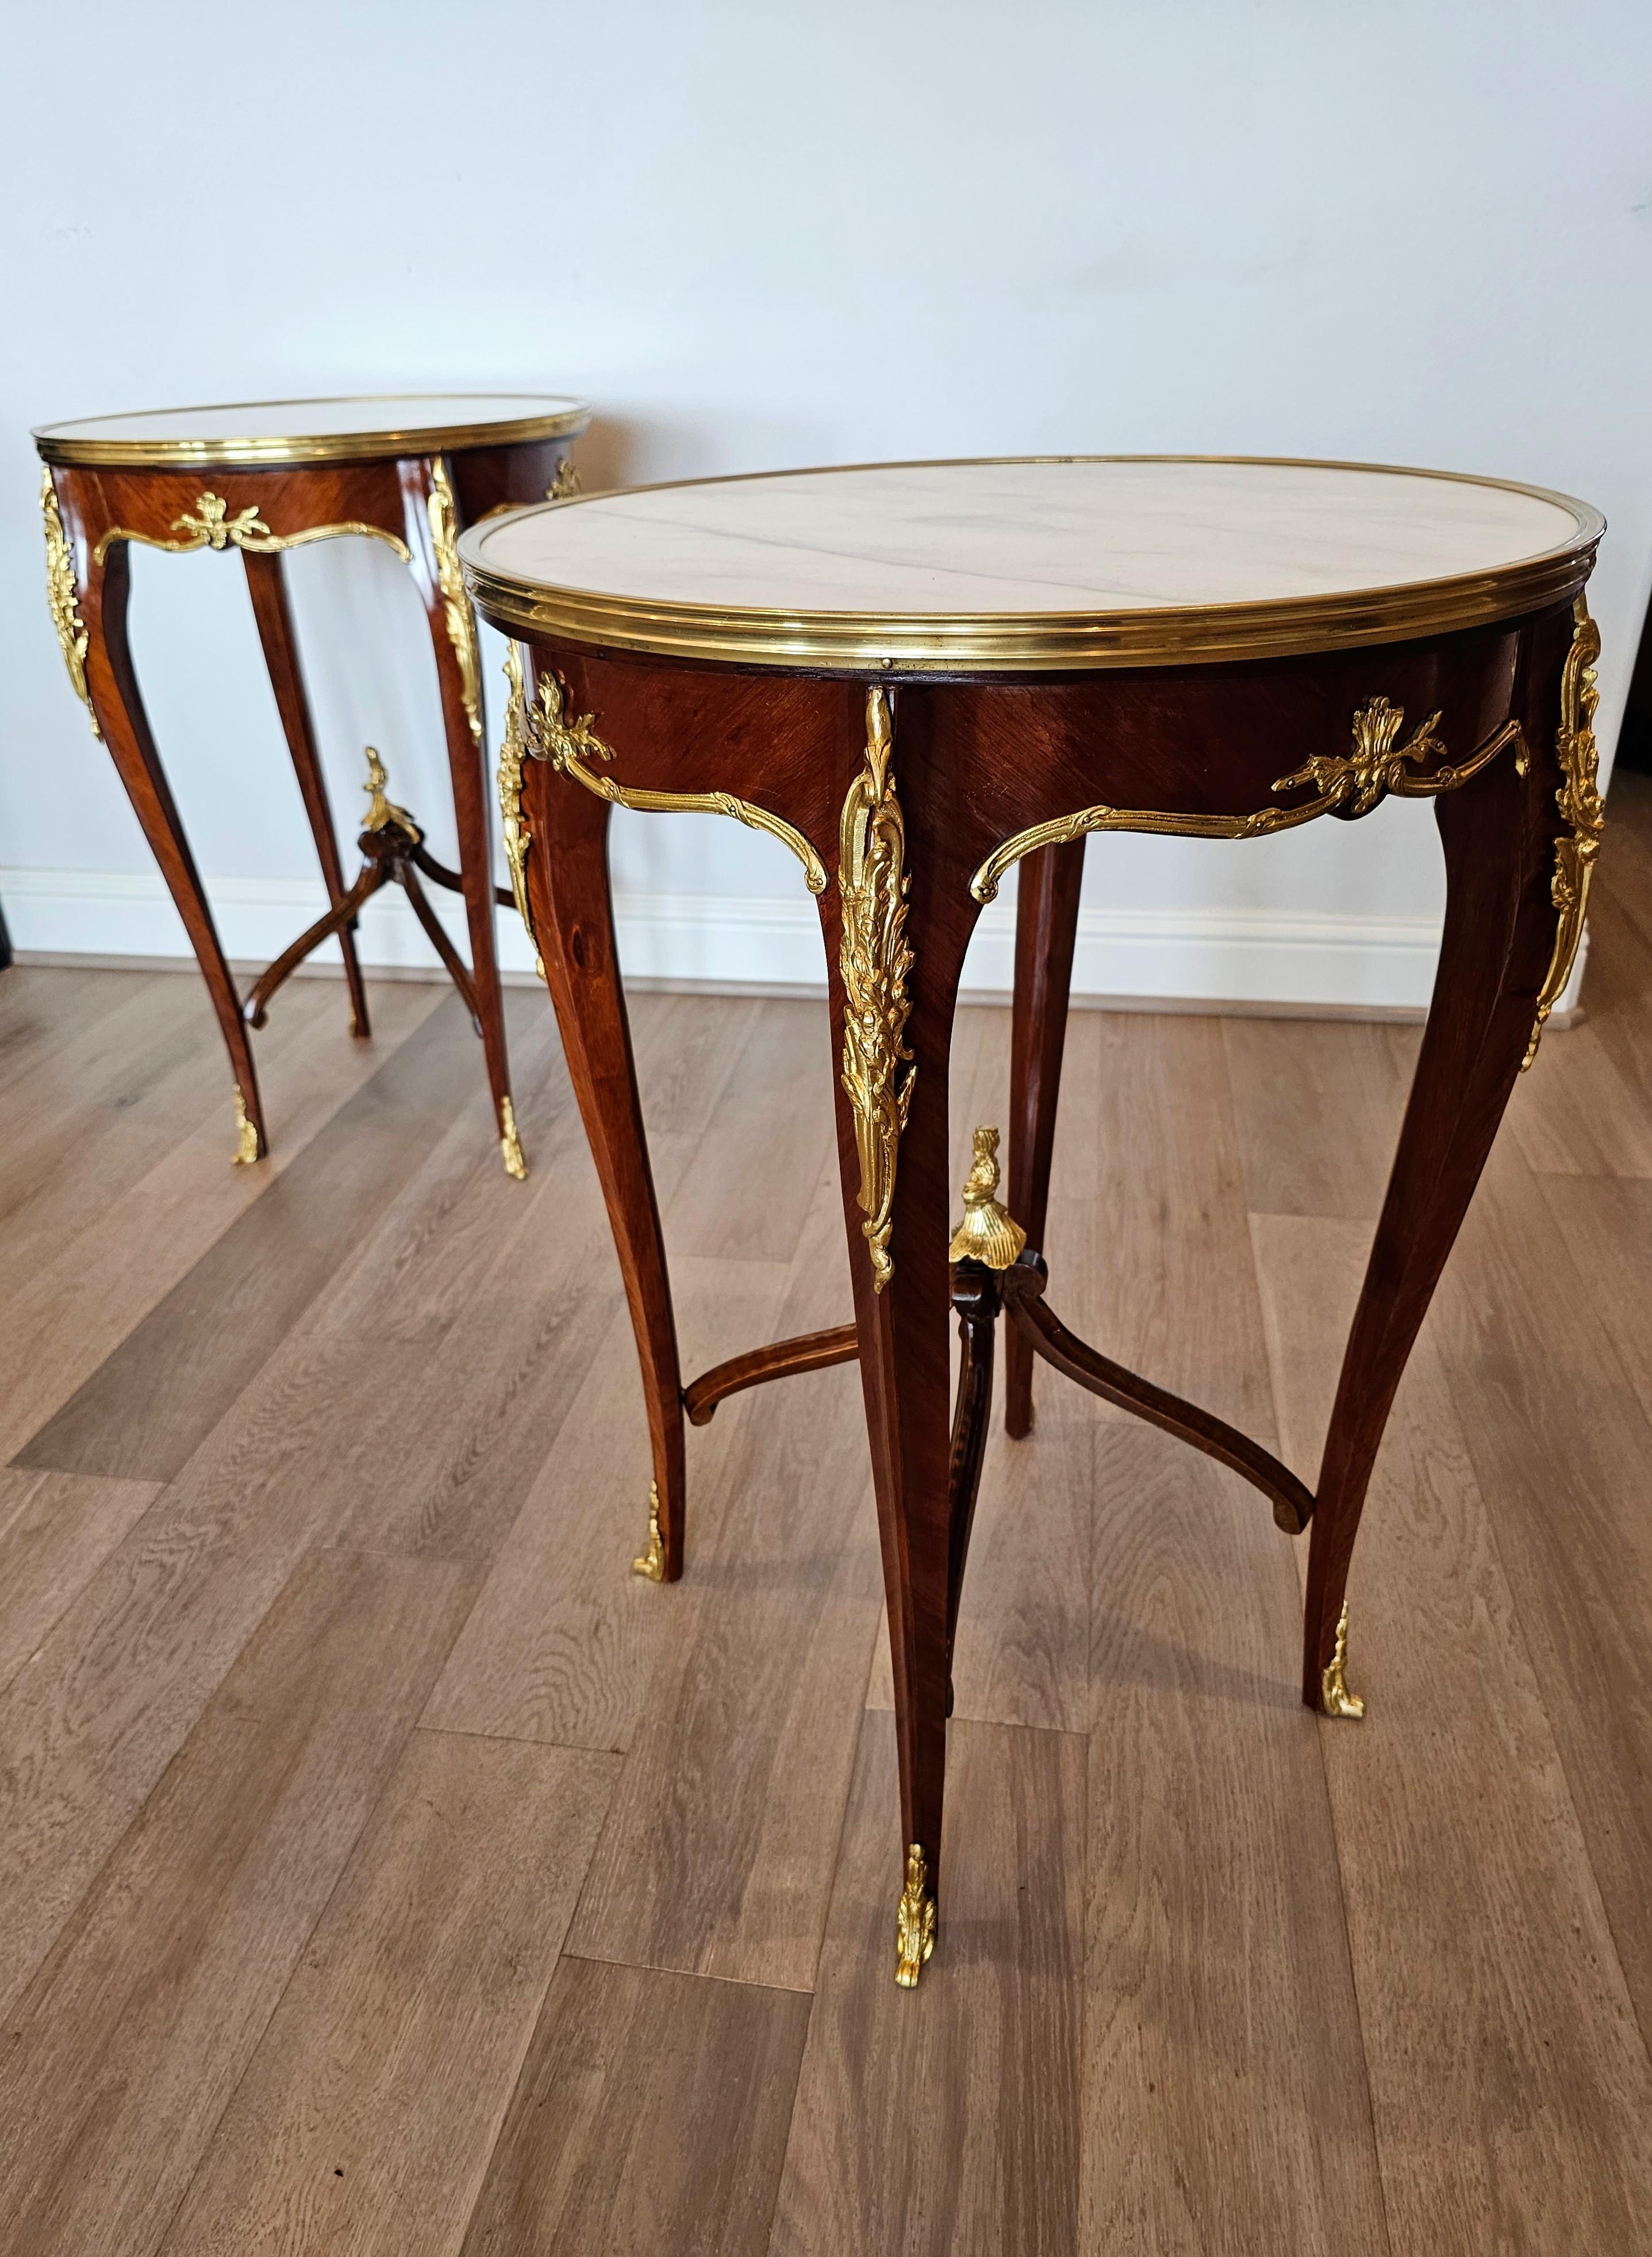 Pair of French Louis XV Style Gilt Bronze Mounted Kingwood Side Tables For Sale 5